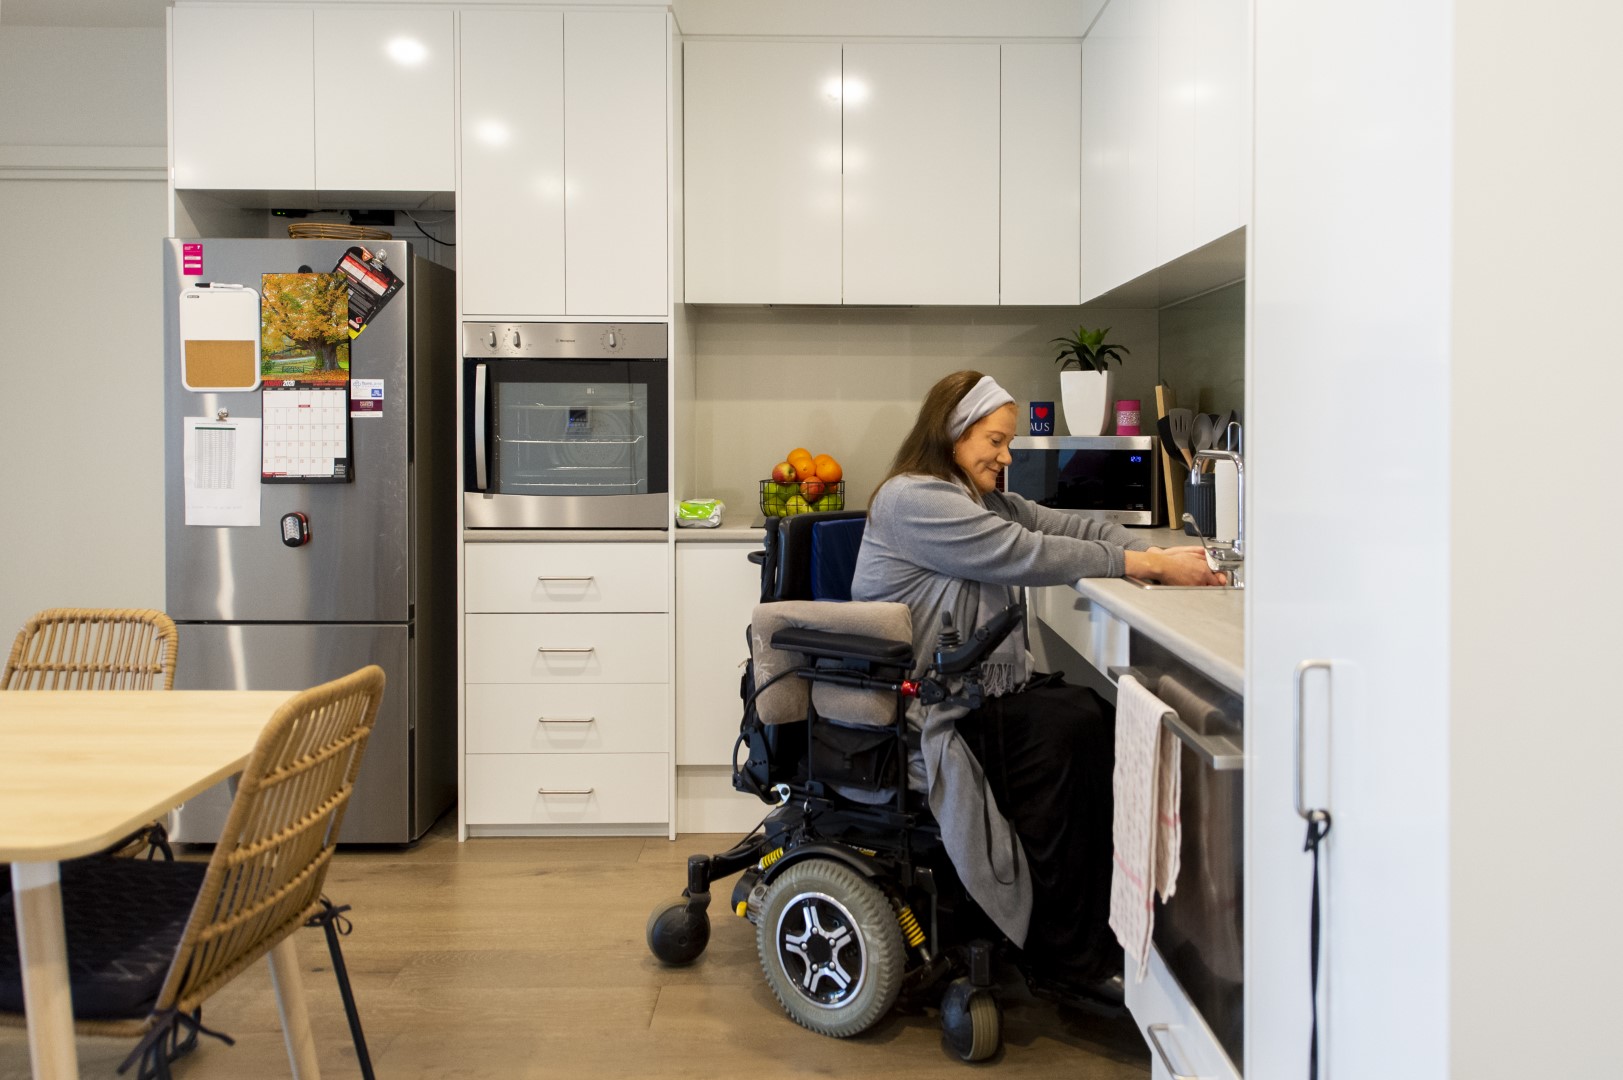 NDIS participant using the sink in the kitchen area of an SDA property